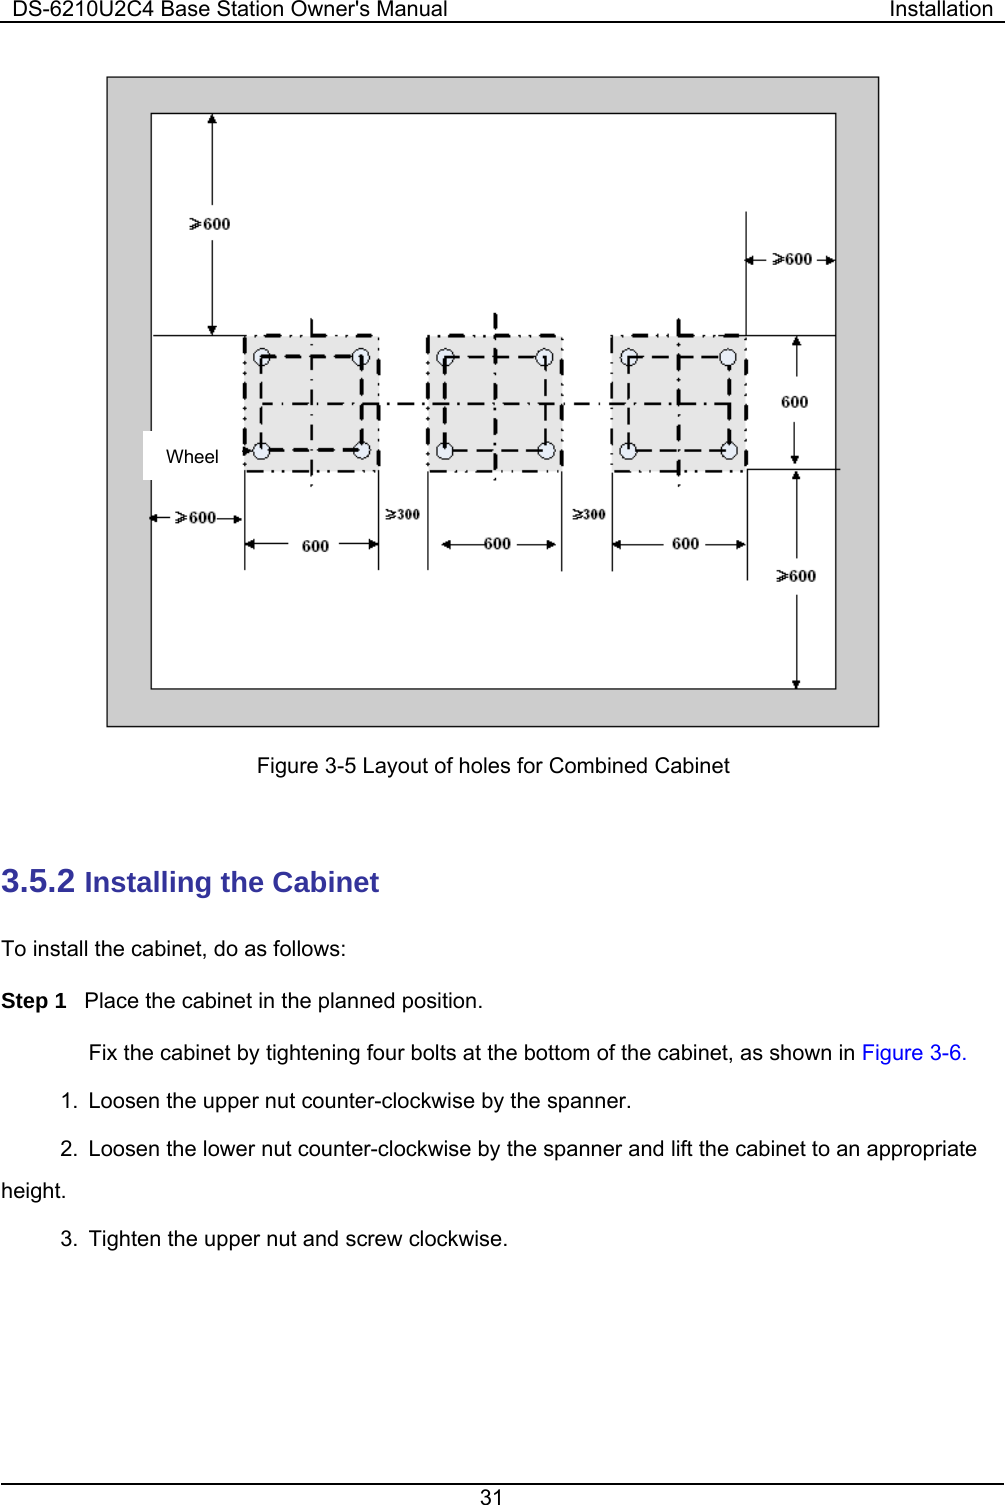 DS-6210U2C4 Base Station Owner&apos;s Manual  Installation 31   Figure 3-5 Layout of holes for Combined Cabinet    3.5.2 Installing the Cabinet   To install the cabinet, do as follows:   Step 1  Place the cabinet in the planned position. Fix the cabinet by tightening four bolts at the bottom of the cabinet, as shown in Figure 3-6.   1.  Loosen the upper nut counter-clockwise by the spanner.   2.  Loosen the lower nut counter-clockwise by the spanner and lift the cabinet to an appropriate height.  3.  Tighten the upper nut and screw clockwise.     Wheel 